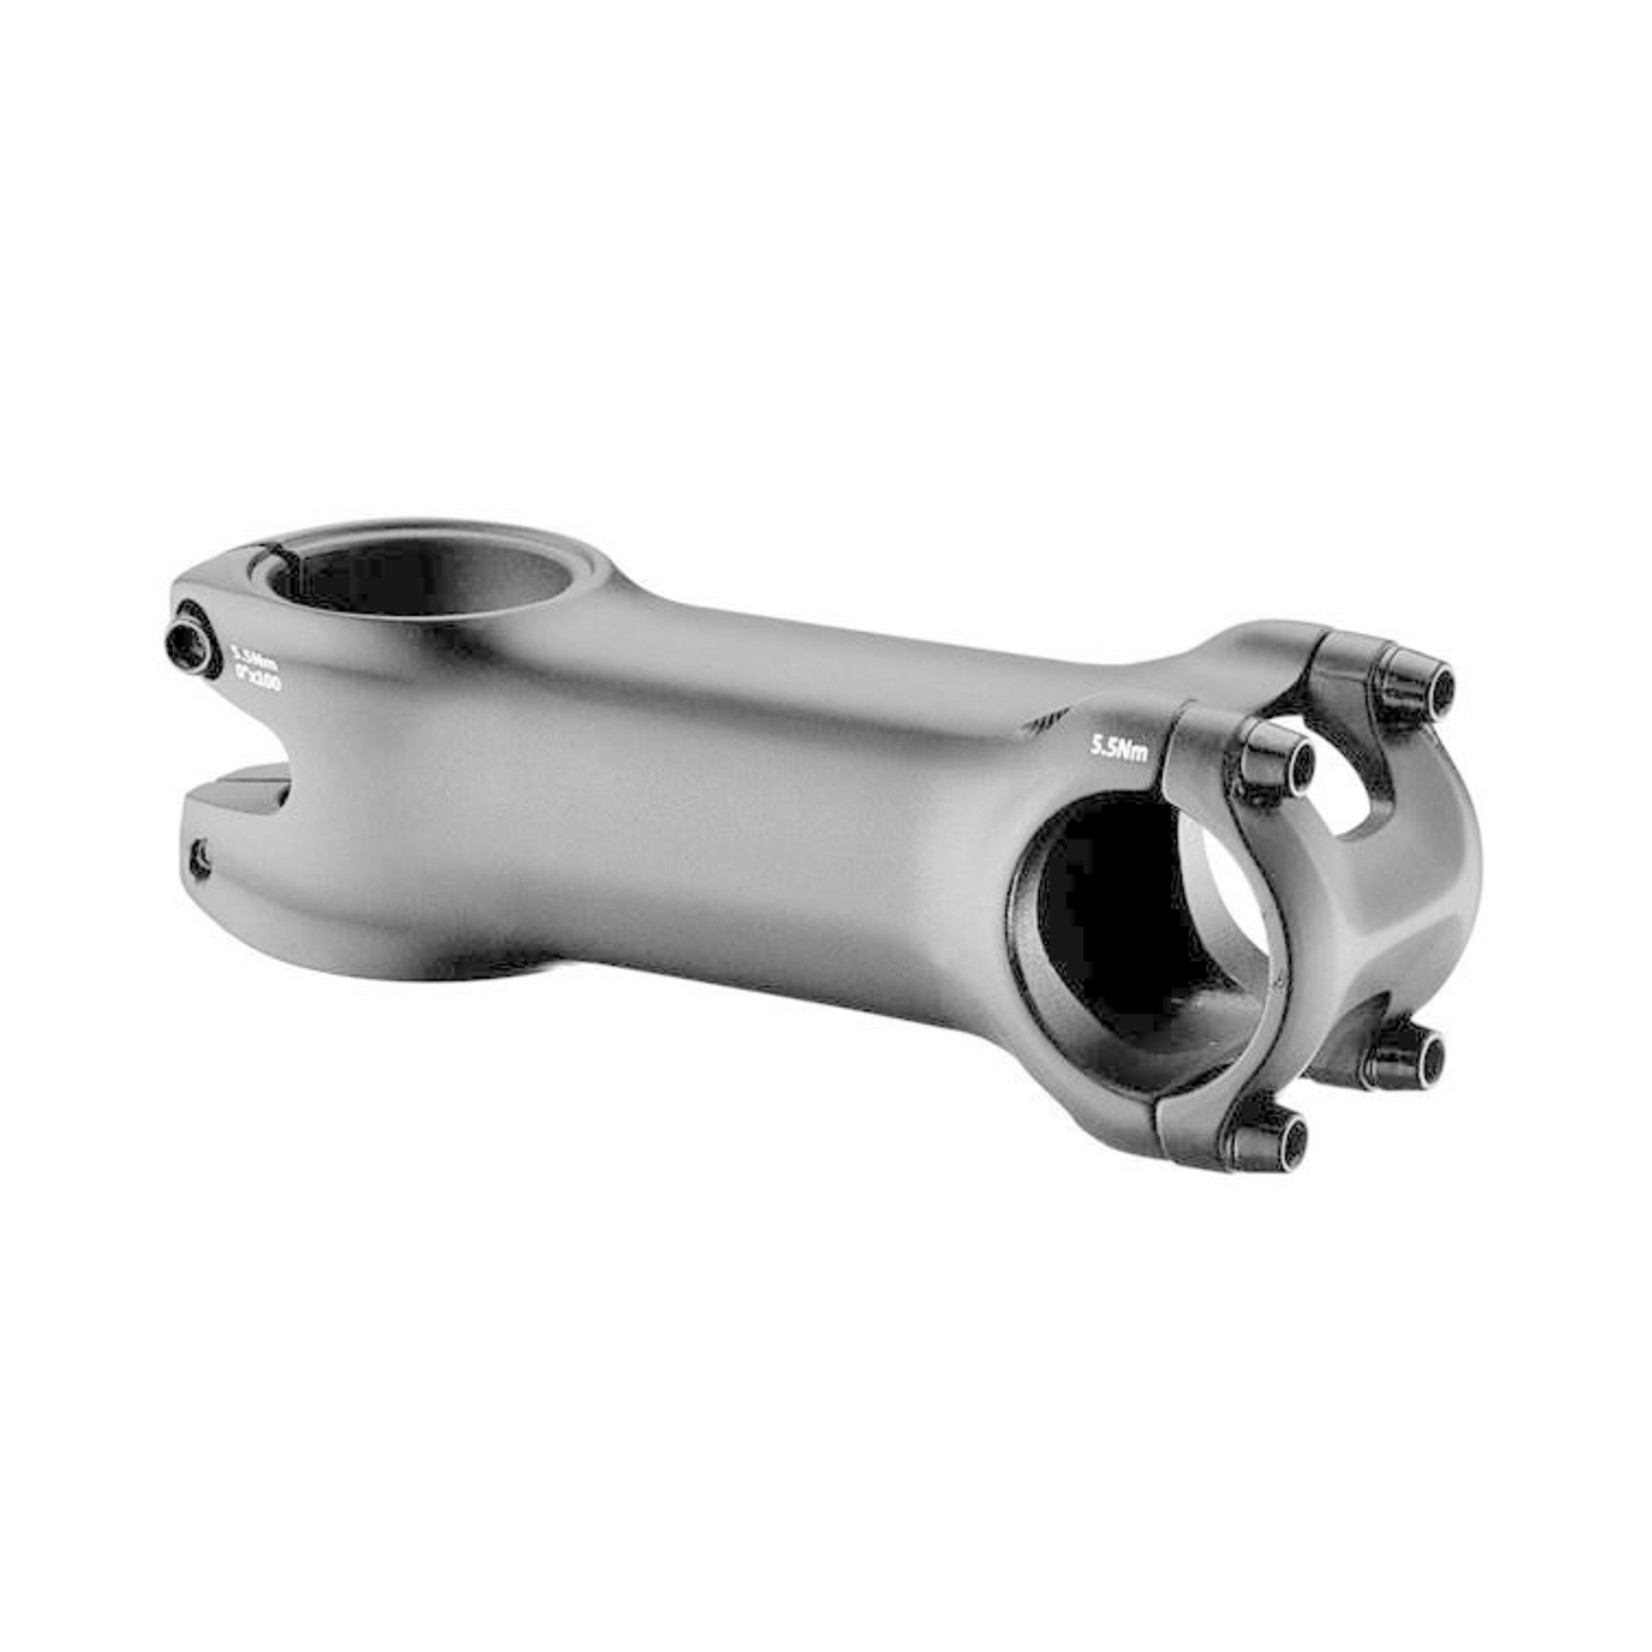 Giant Giant Contact OD2 70mm Stem